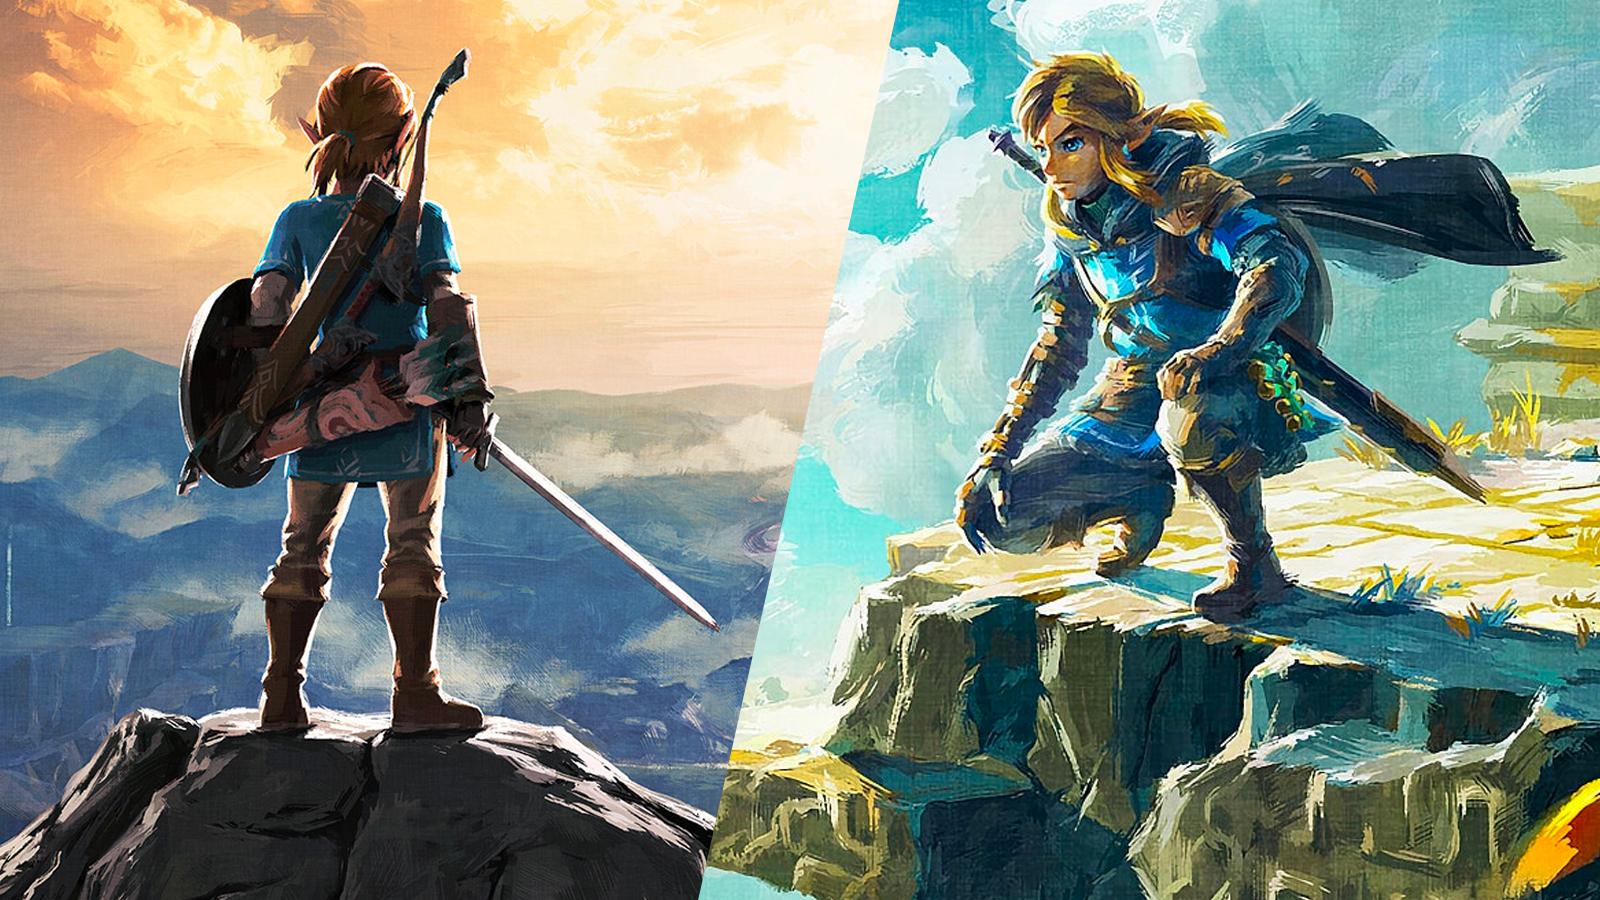 Zelda: Breath of the Wild is already one of the best-reviewed